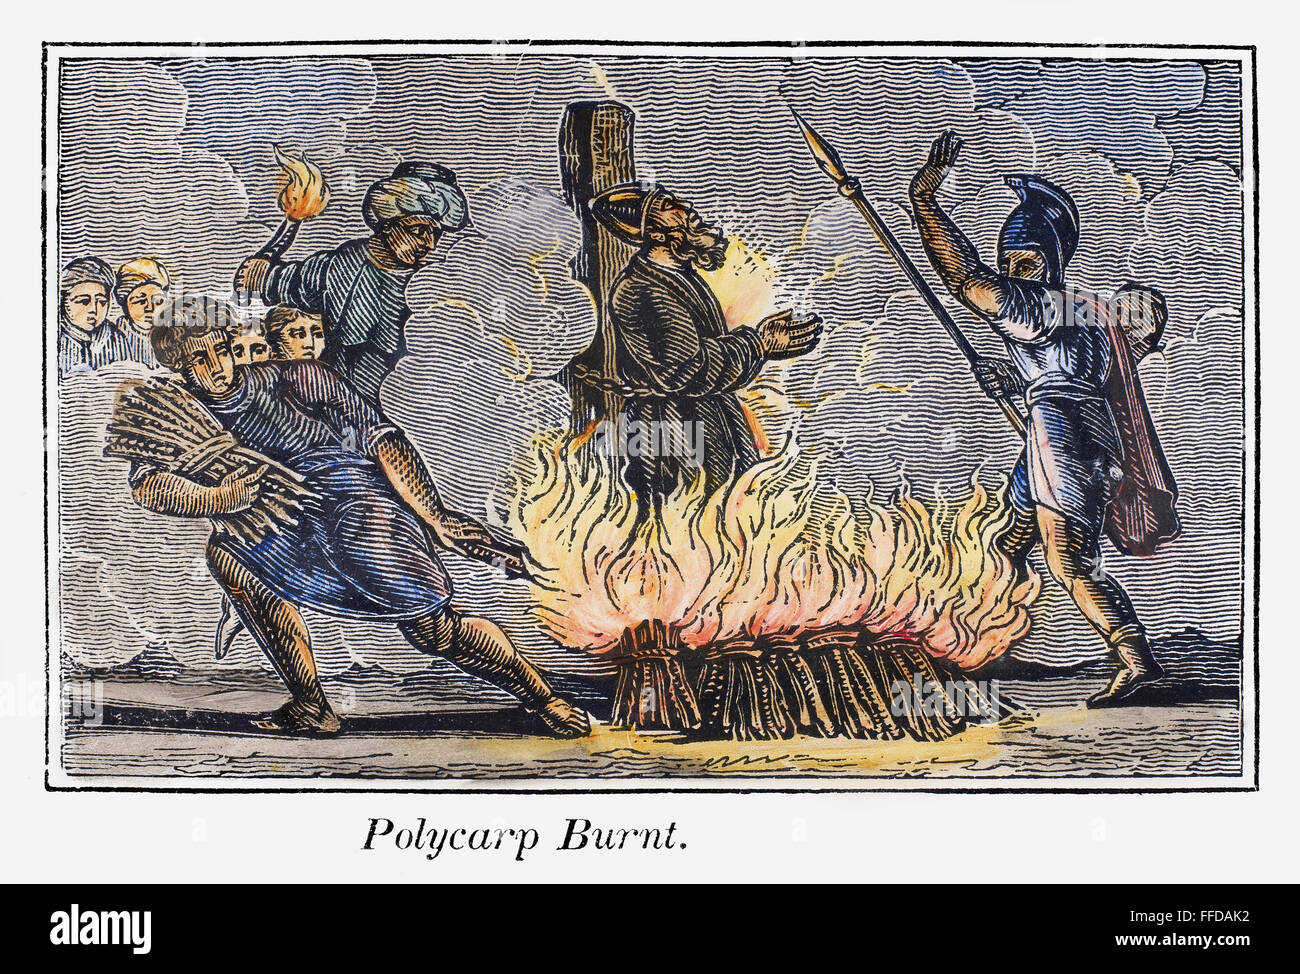 POLYCARP OF SMYRNA /n(c69-c155). Christian martyr and saint. Polycarp burned at the stake by the Romans in 155. Wood engraving from an 1832 American edition of John Foxe's 'Book of Martyrs.' Stock Photo